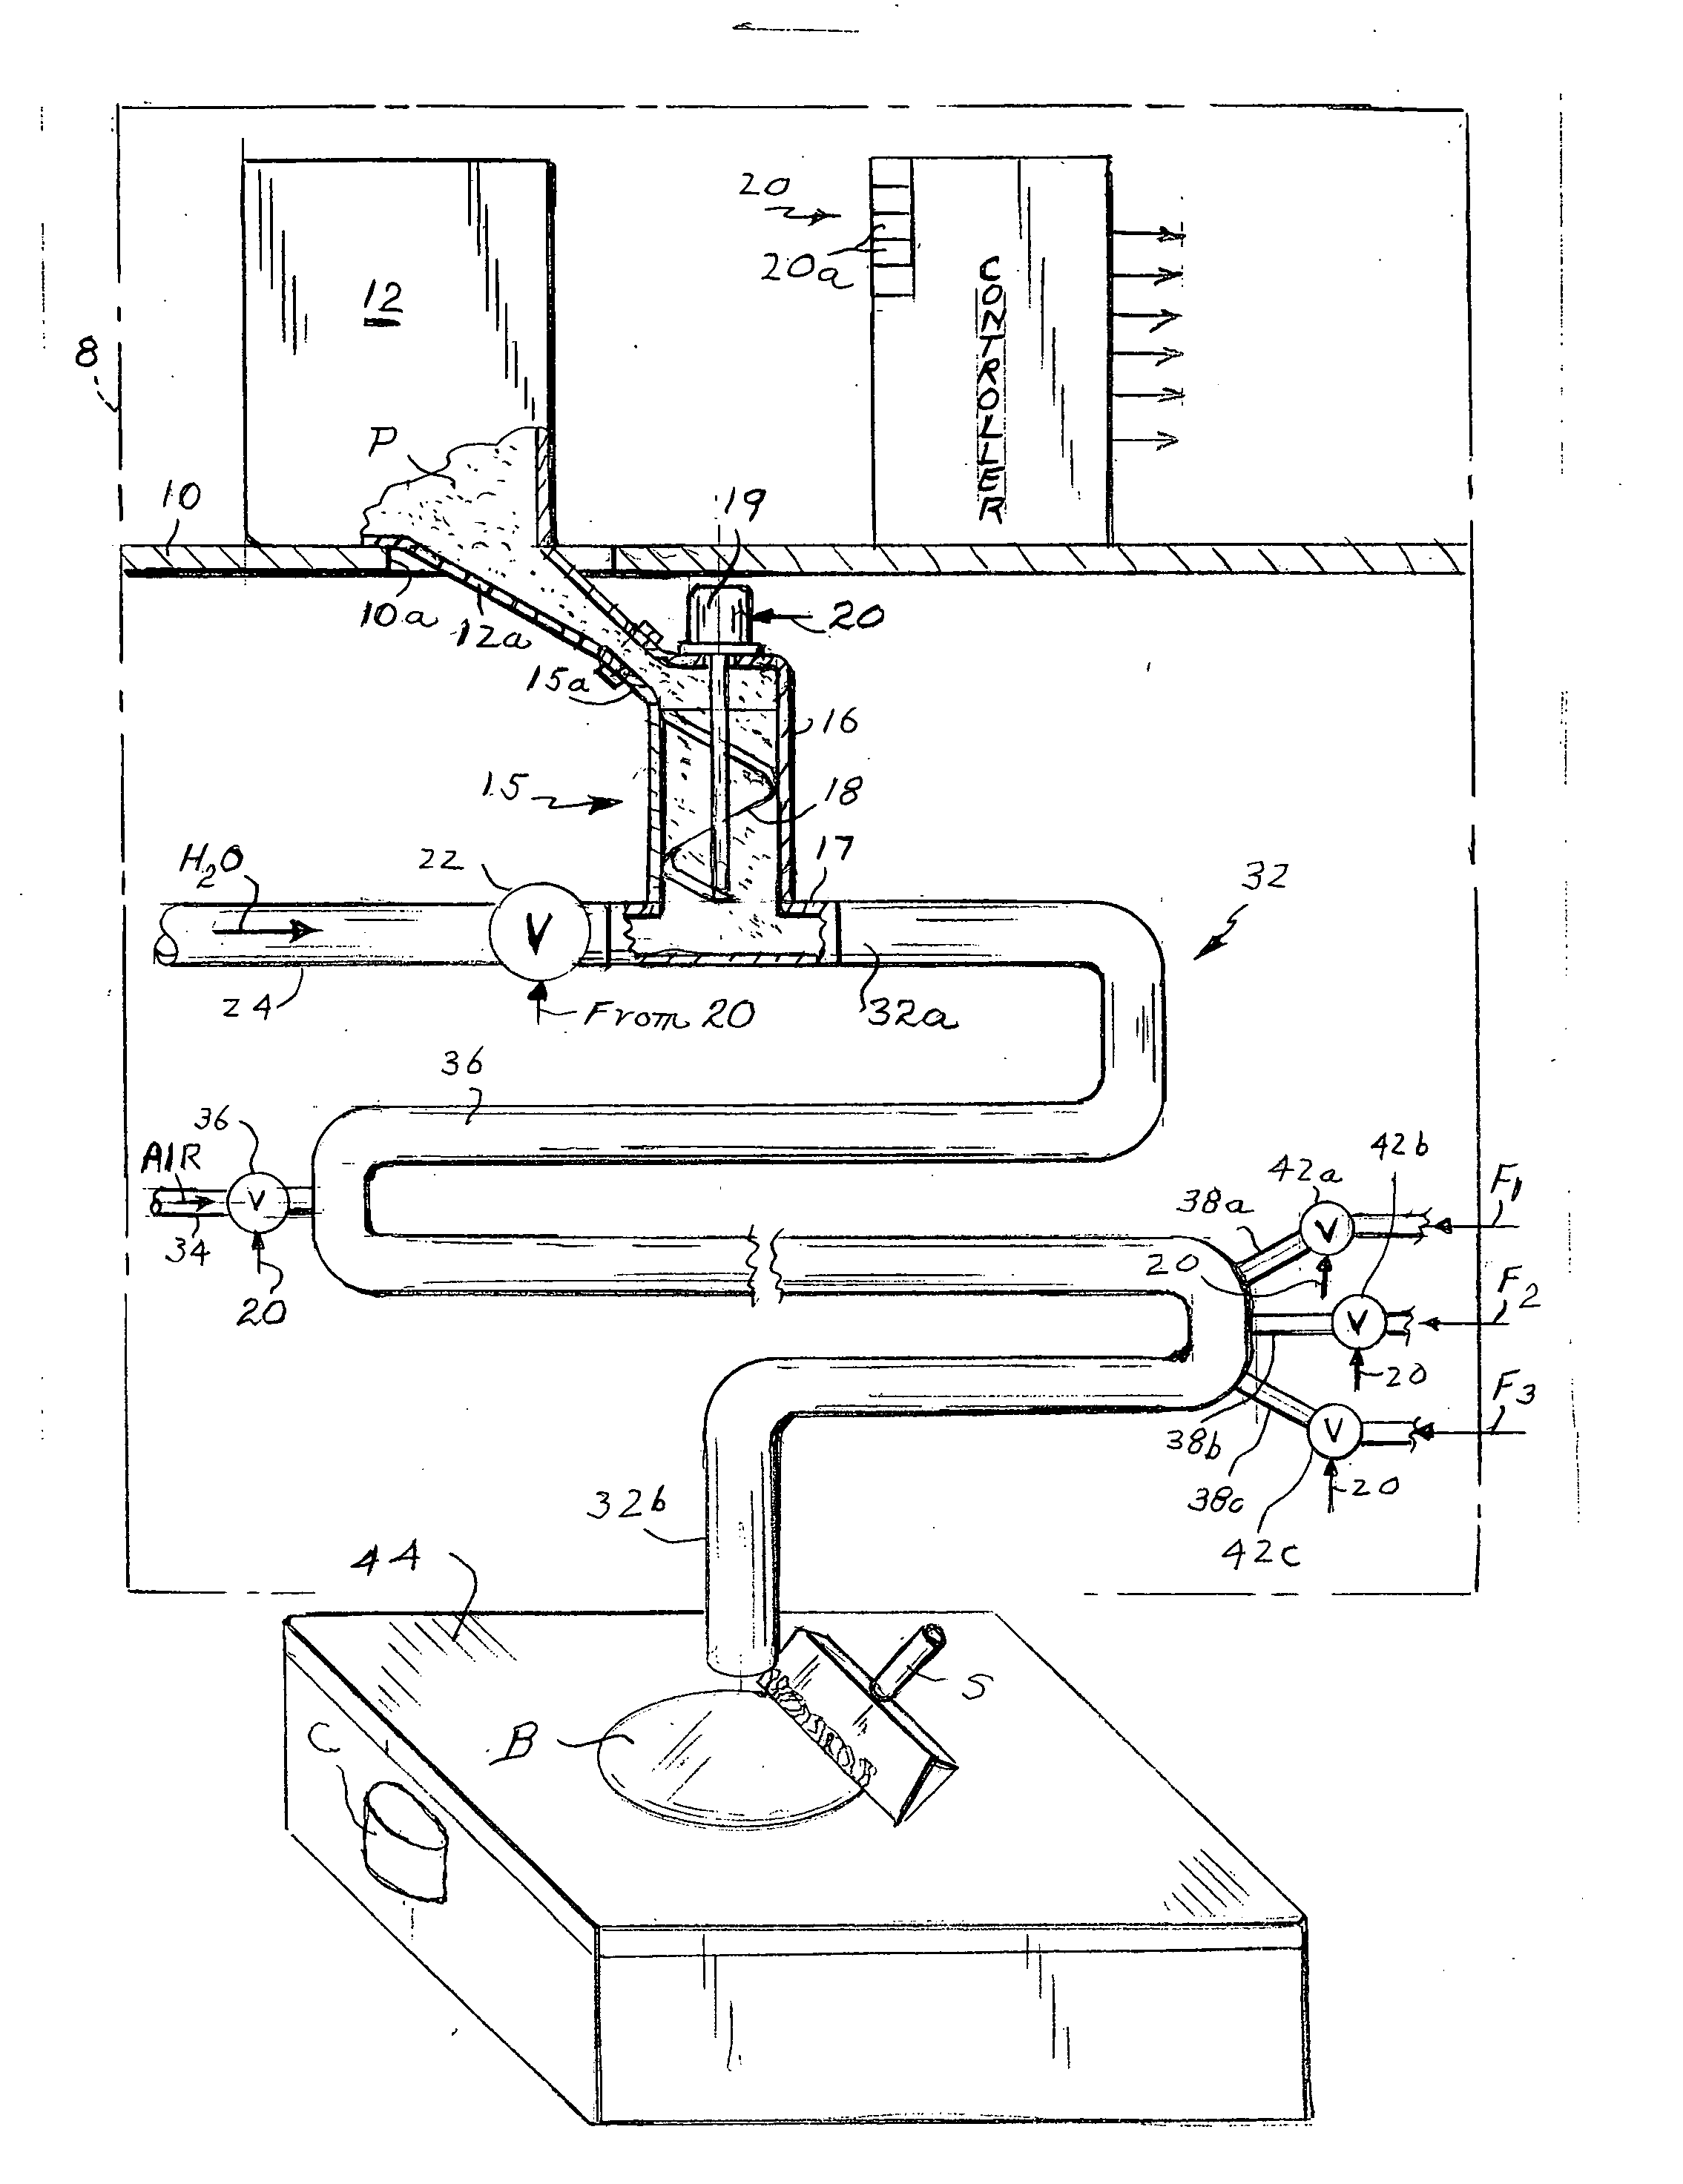 Dry-base aerated food product dispensing method and apparatus